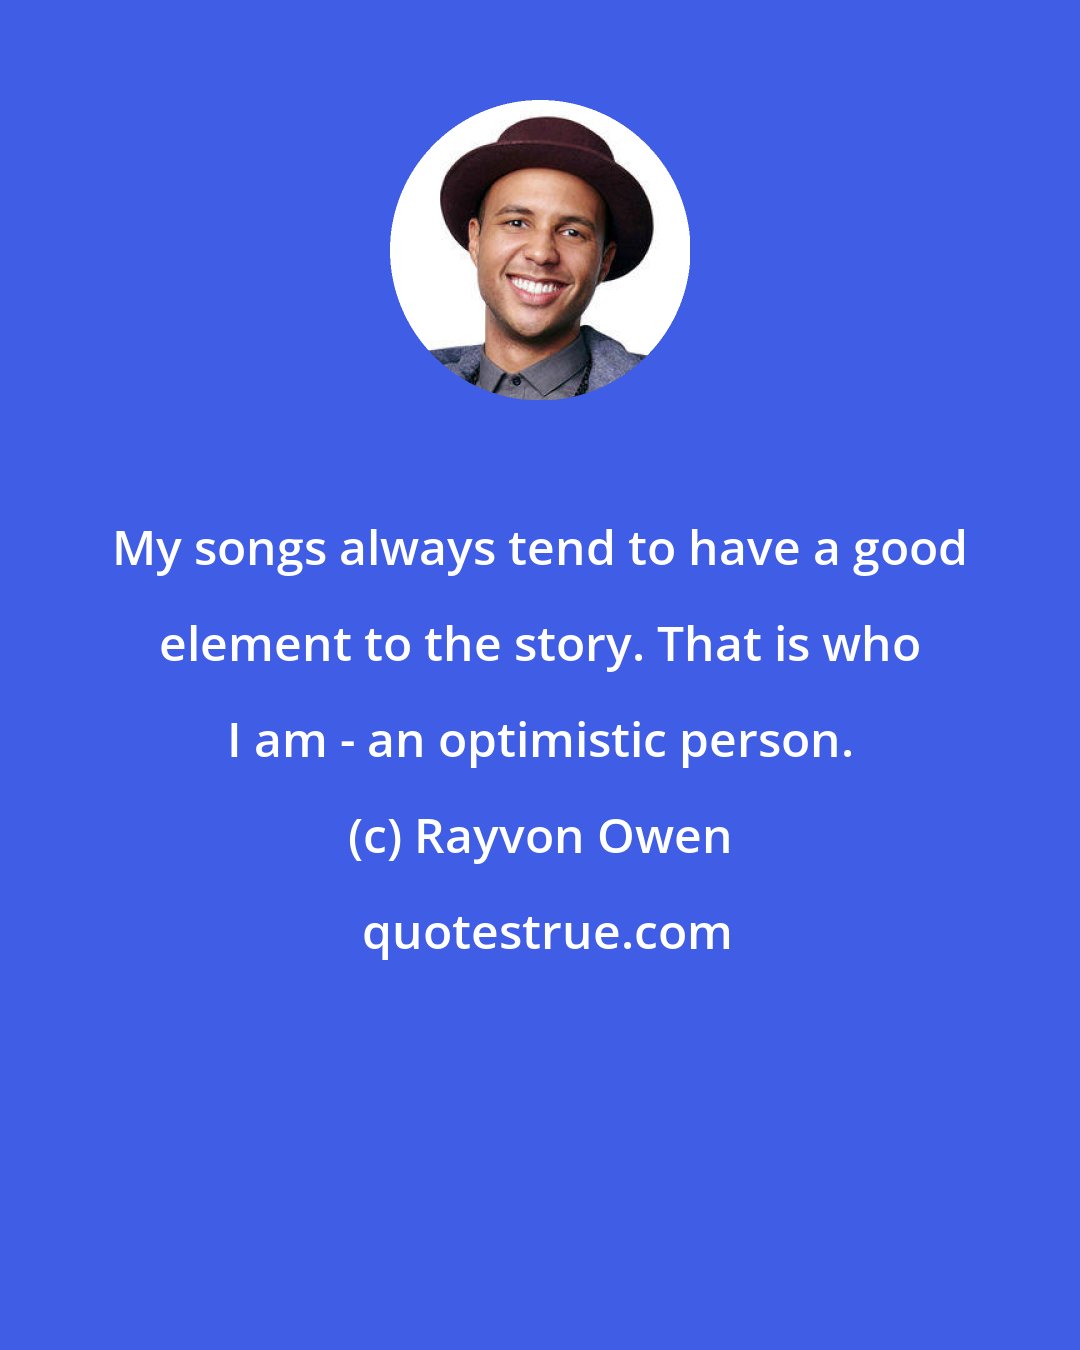 Rayvon Owen: My songs always tend to have a good element to the story. That is who I am - an optimistic person.